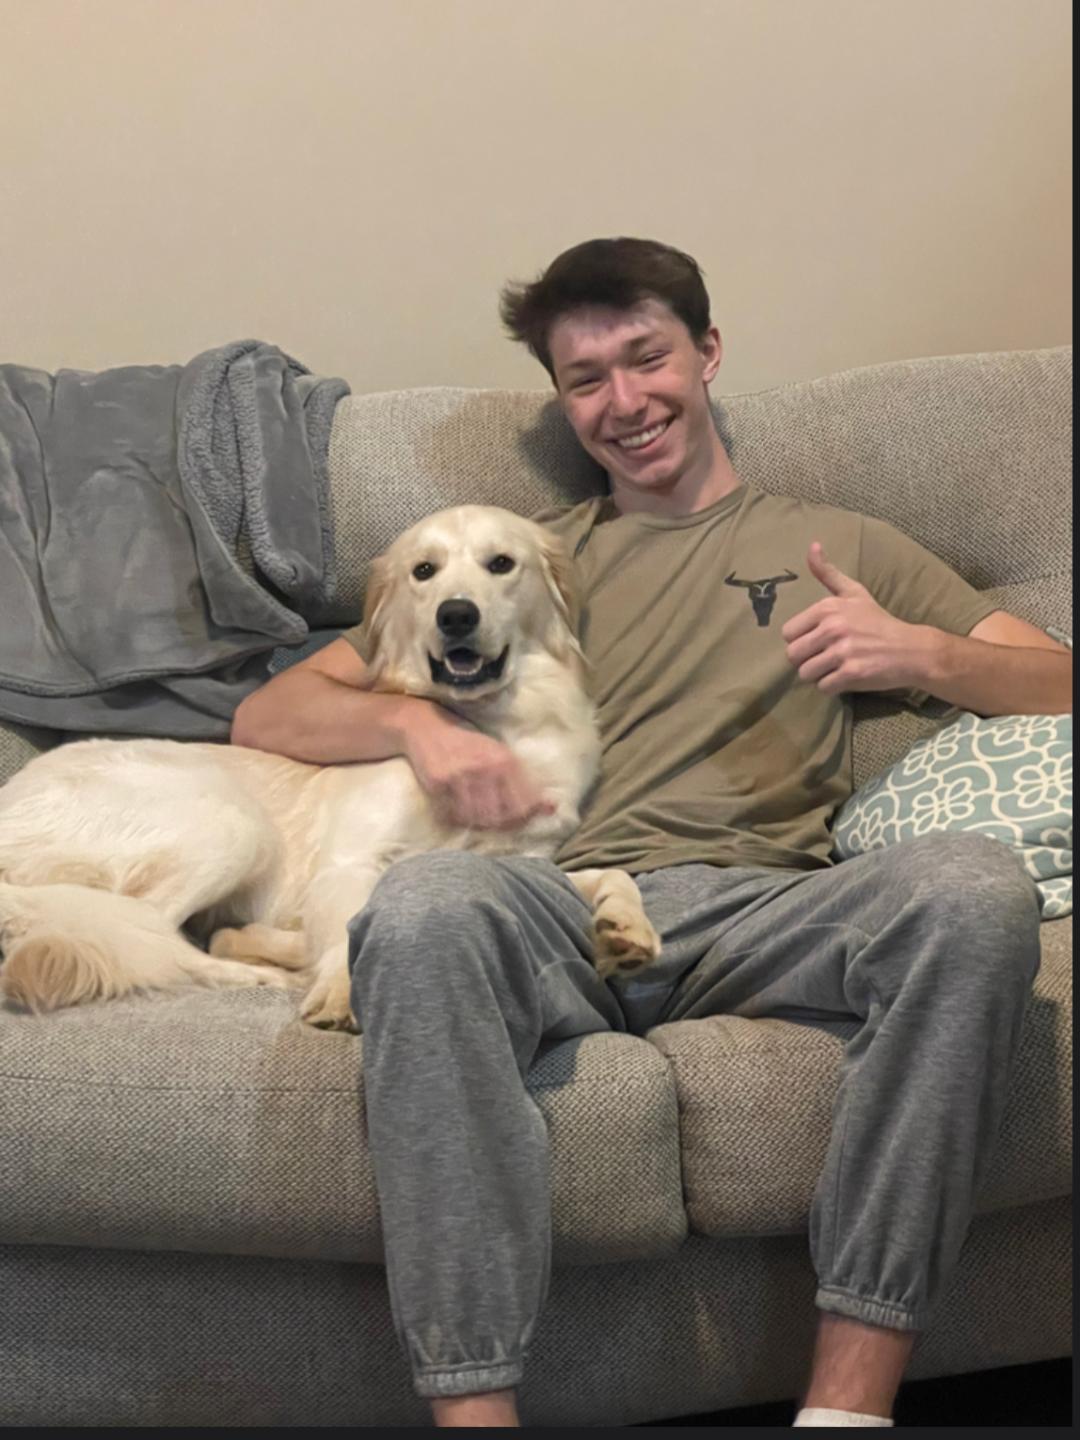 Man sitting on couch with golden retriever